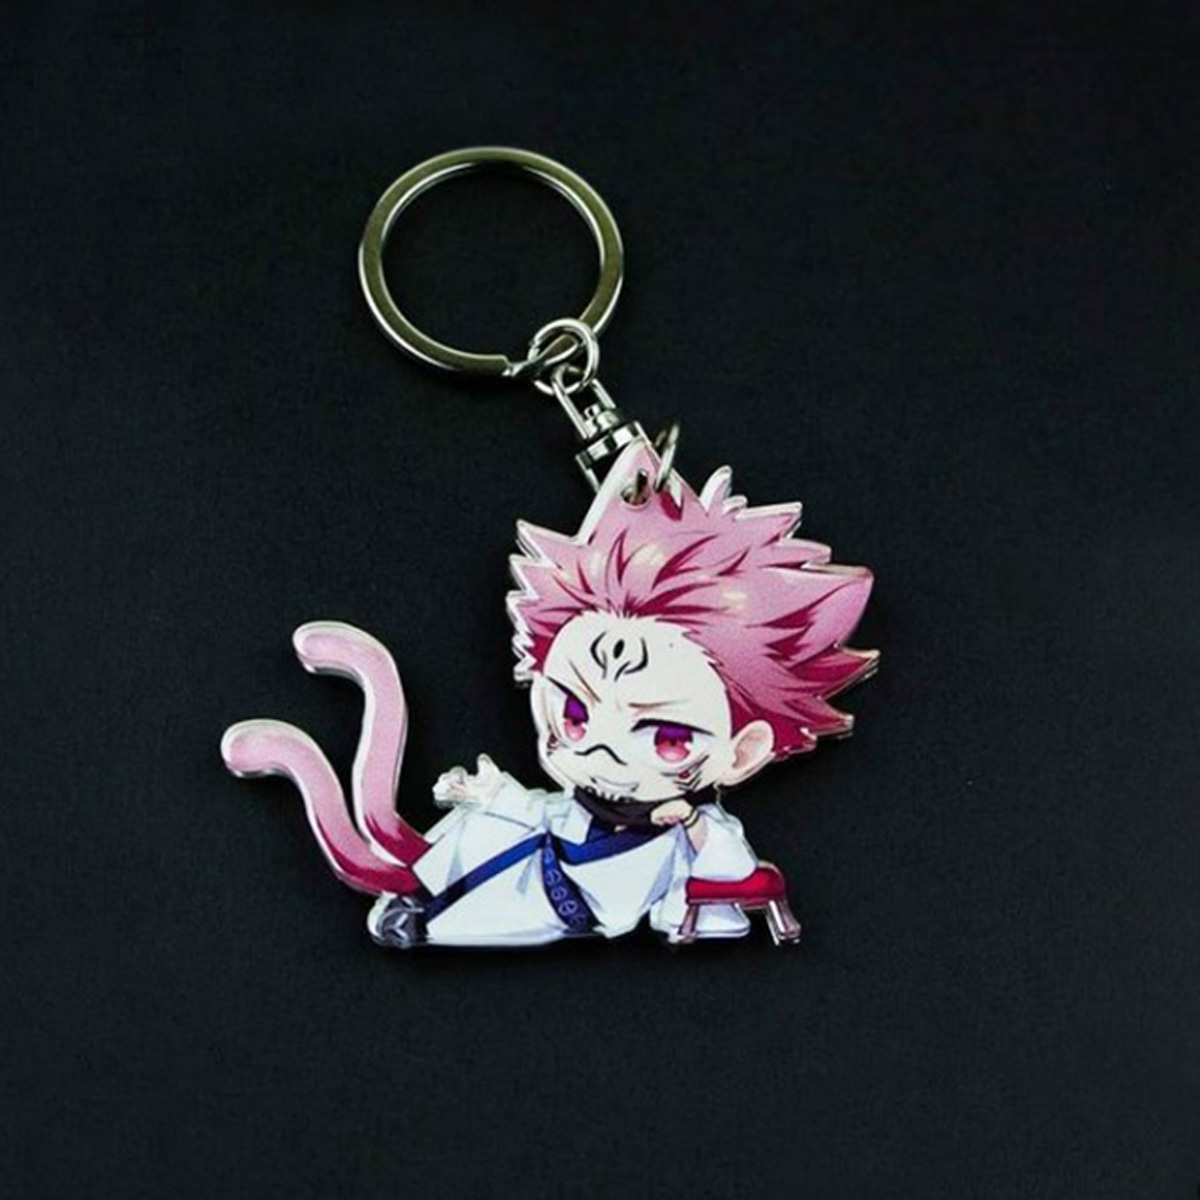 Buy Black Clover Anime Keychain online  Lazadacomph